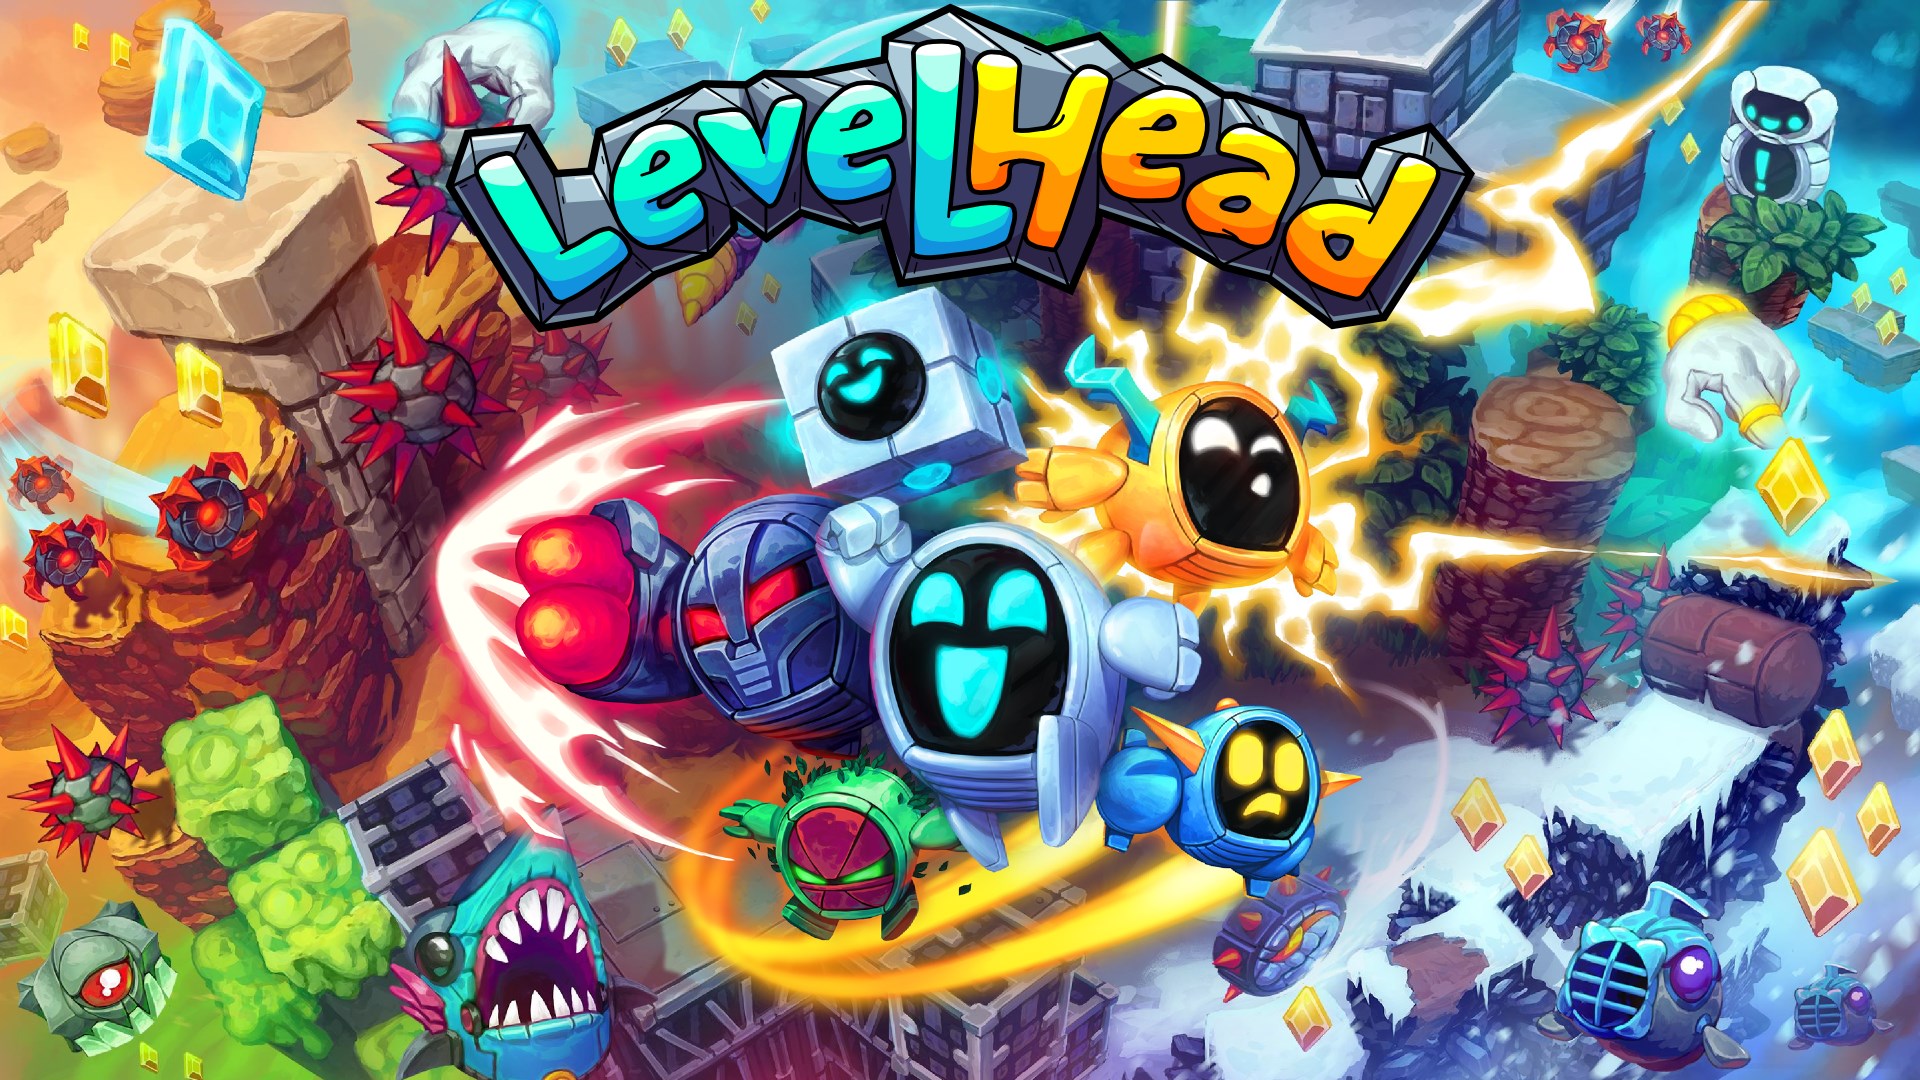 Video For Levelhead Is Now Available For Xbox One And Windows 10 (Xbox Play Anywhere) Plus Xbox Game Pass